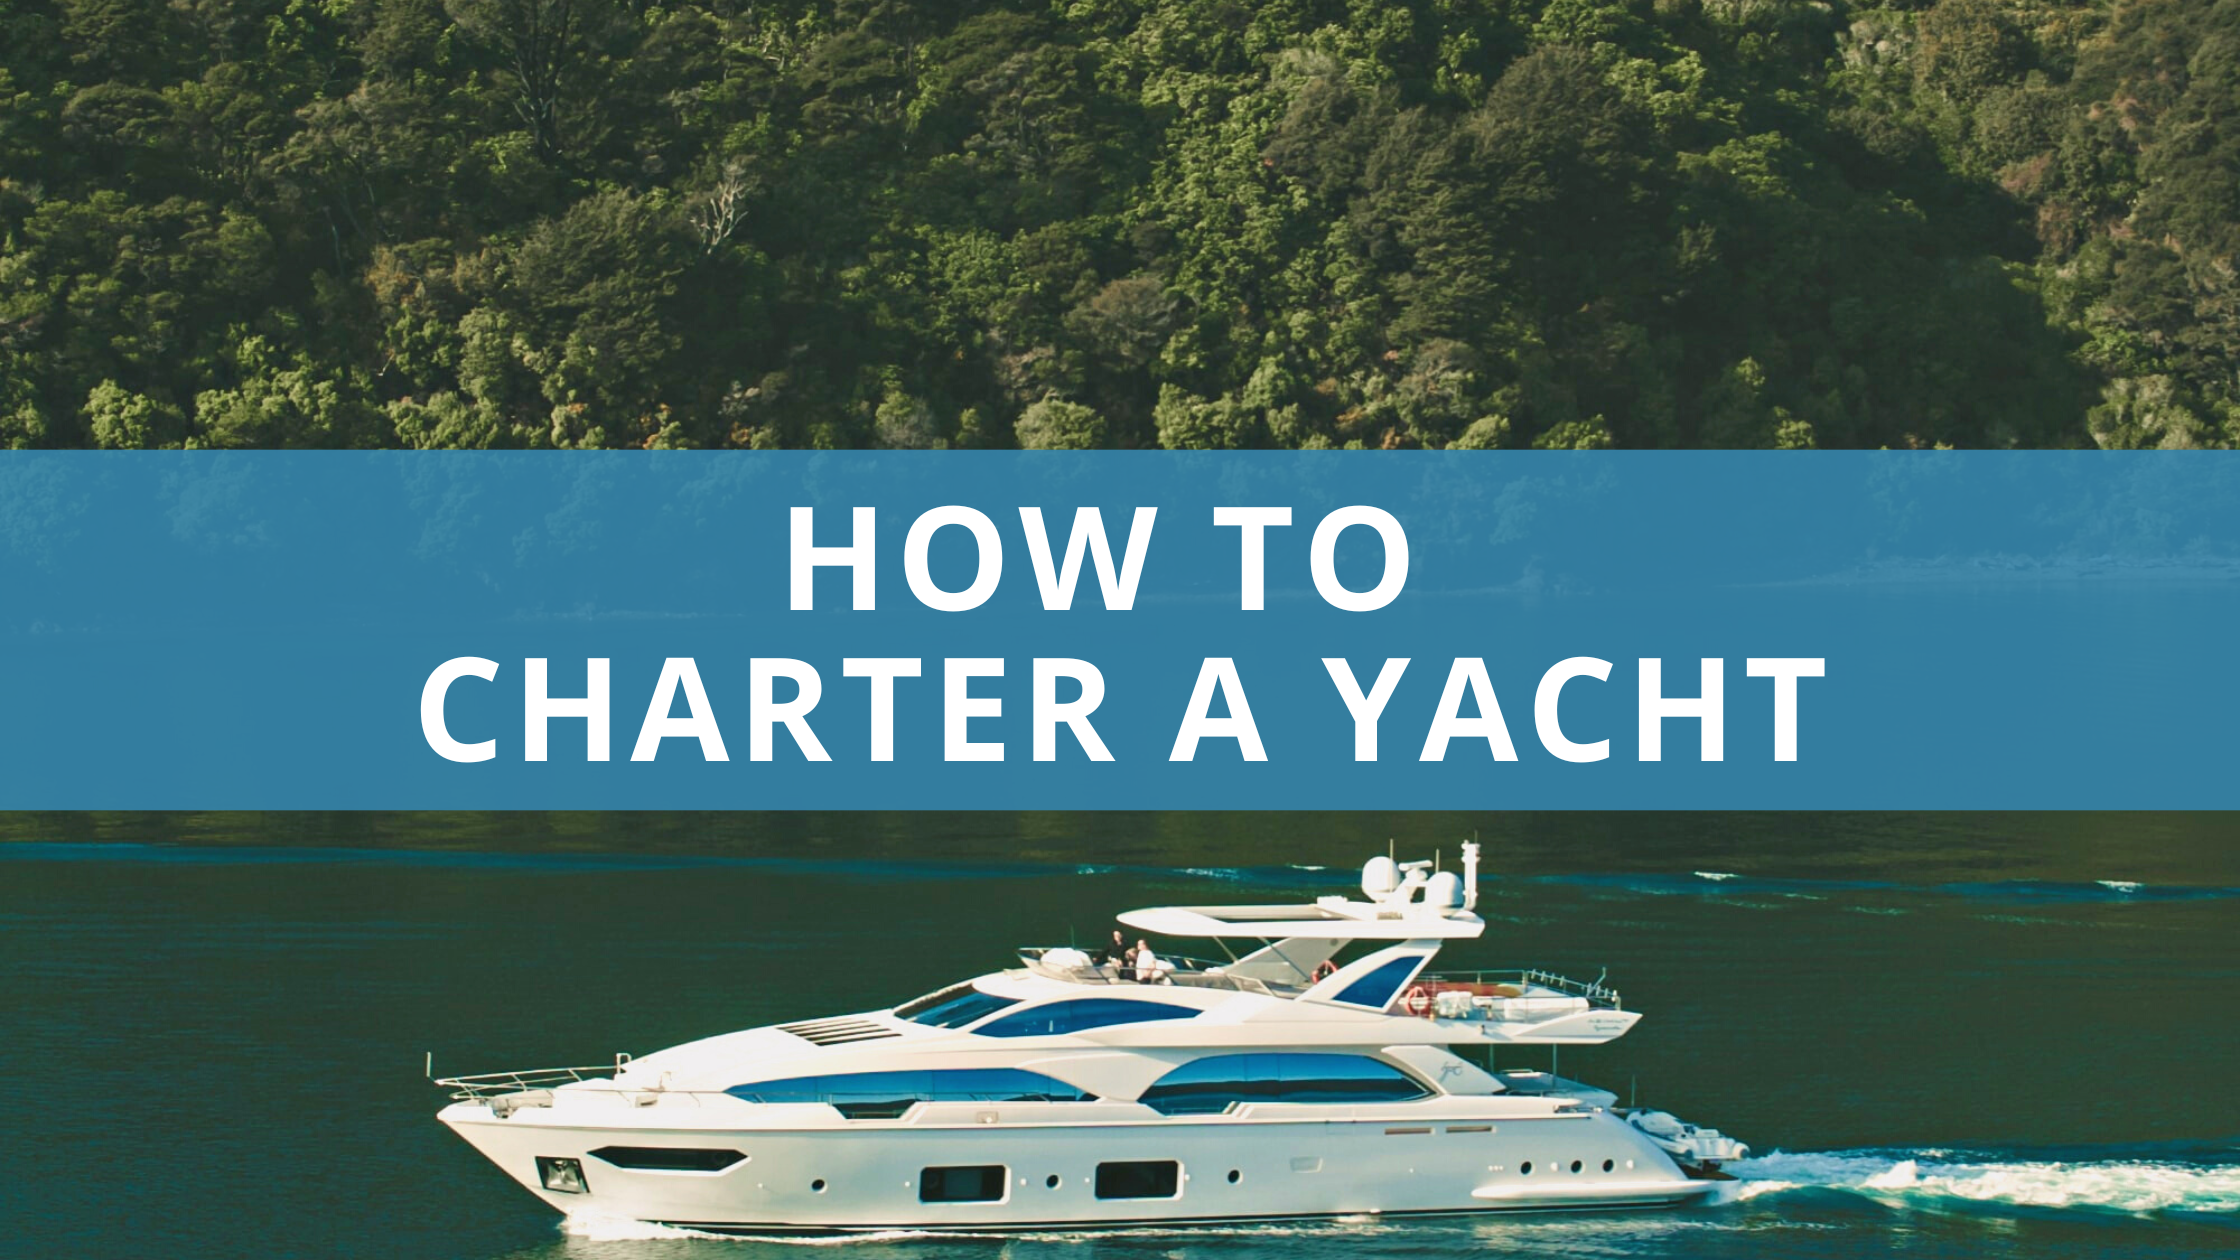 How to Charter a Yacht